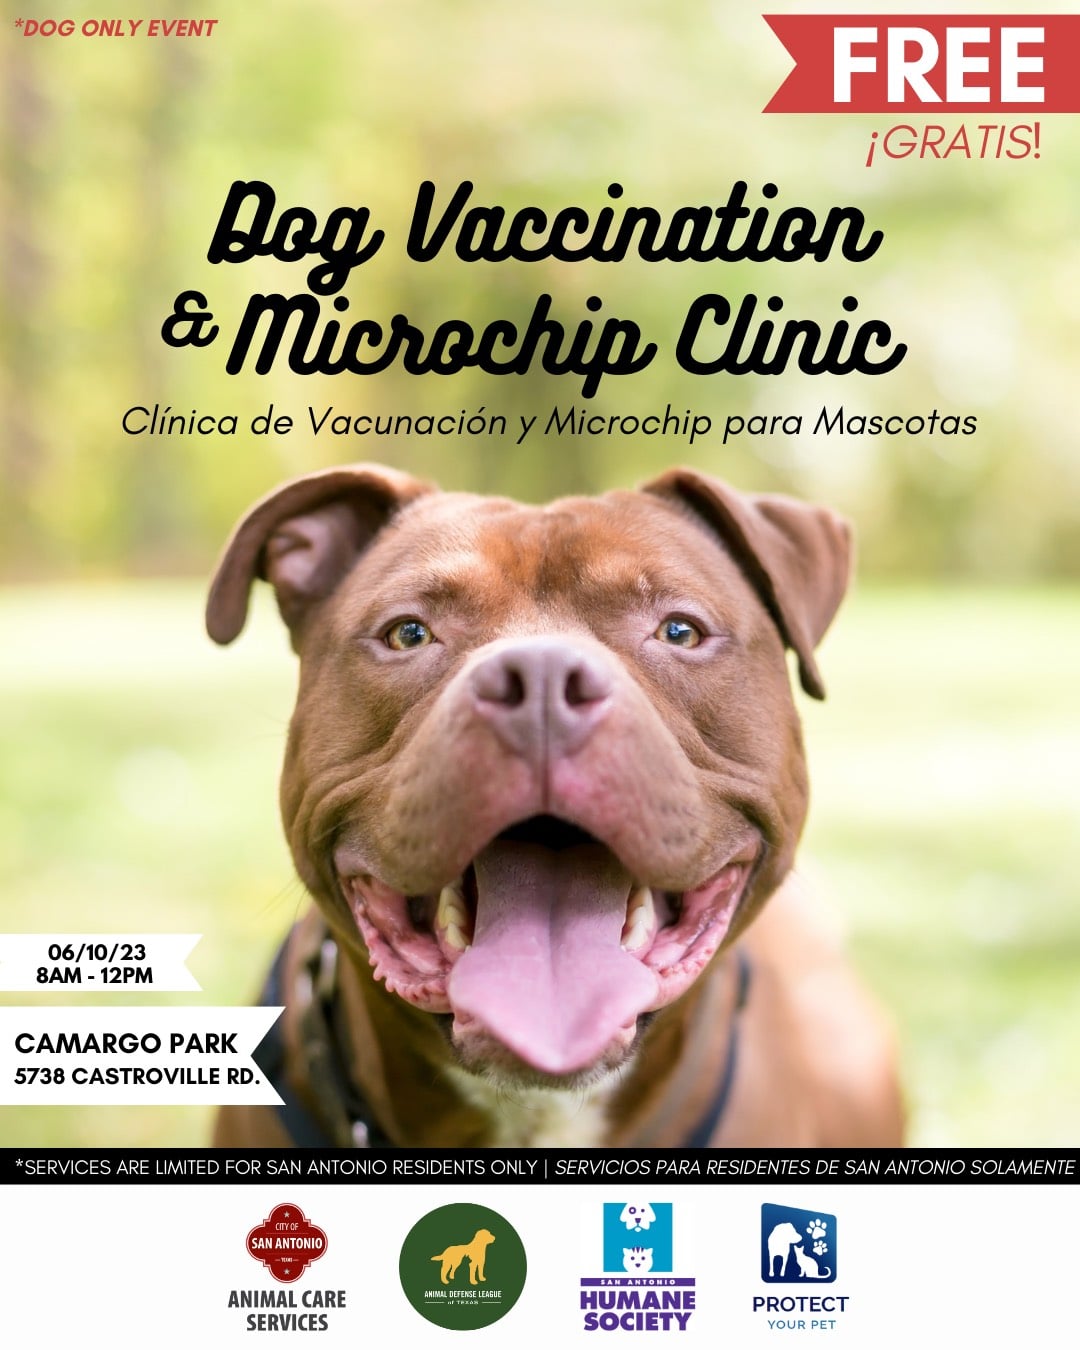 Dog vaccination clinic